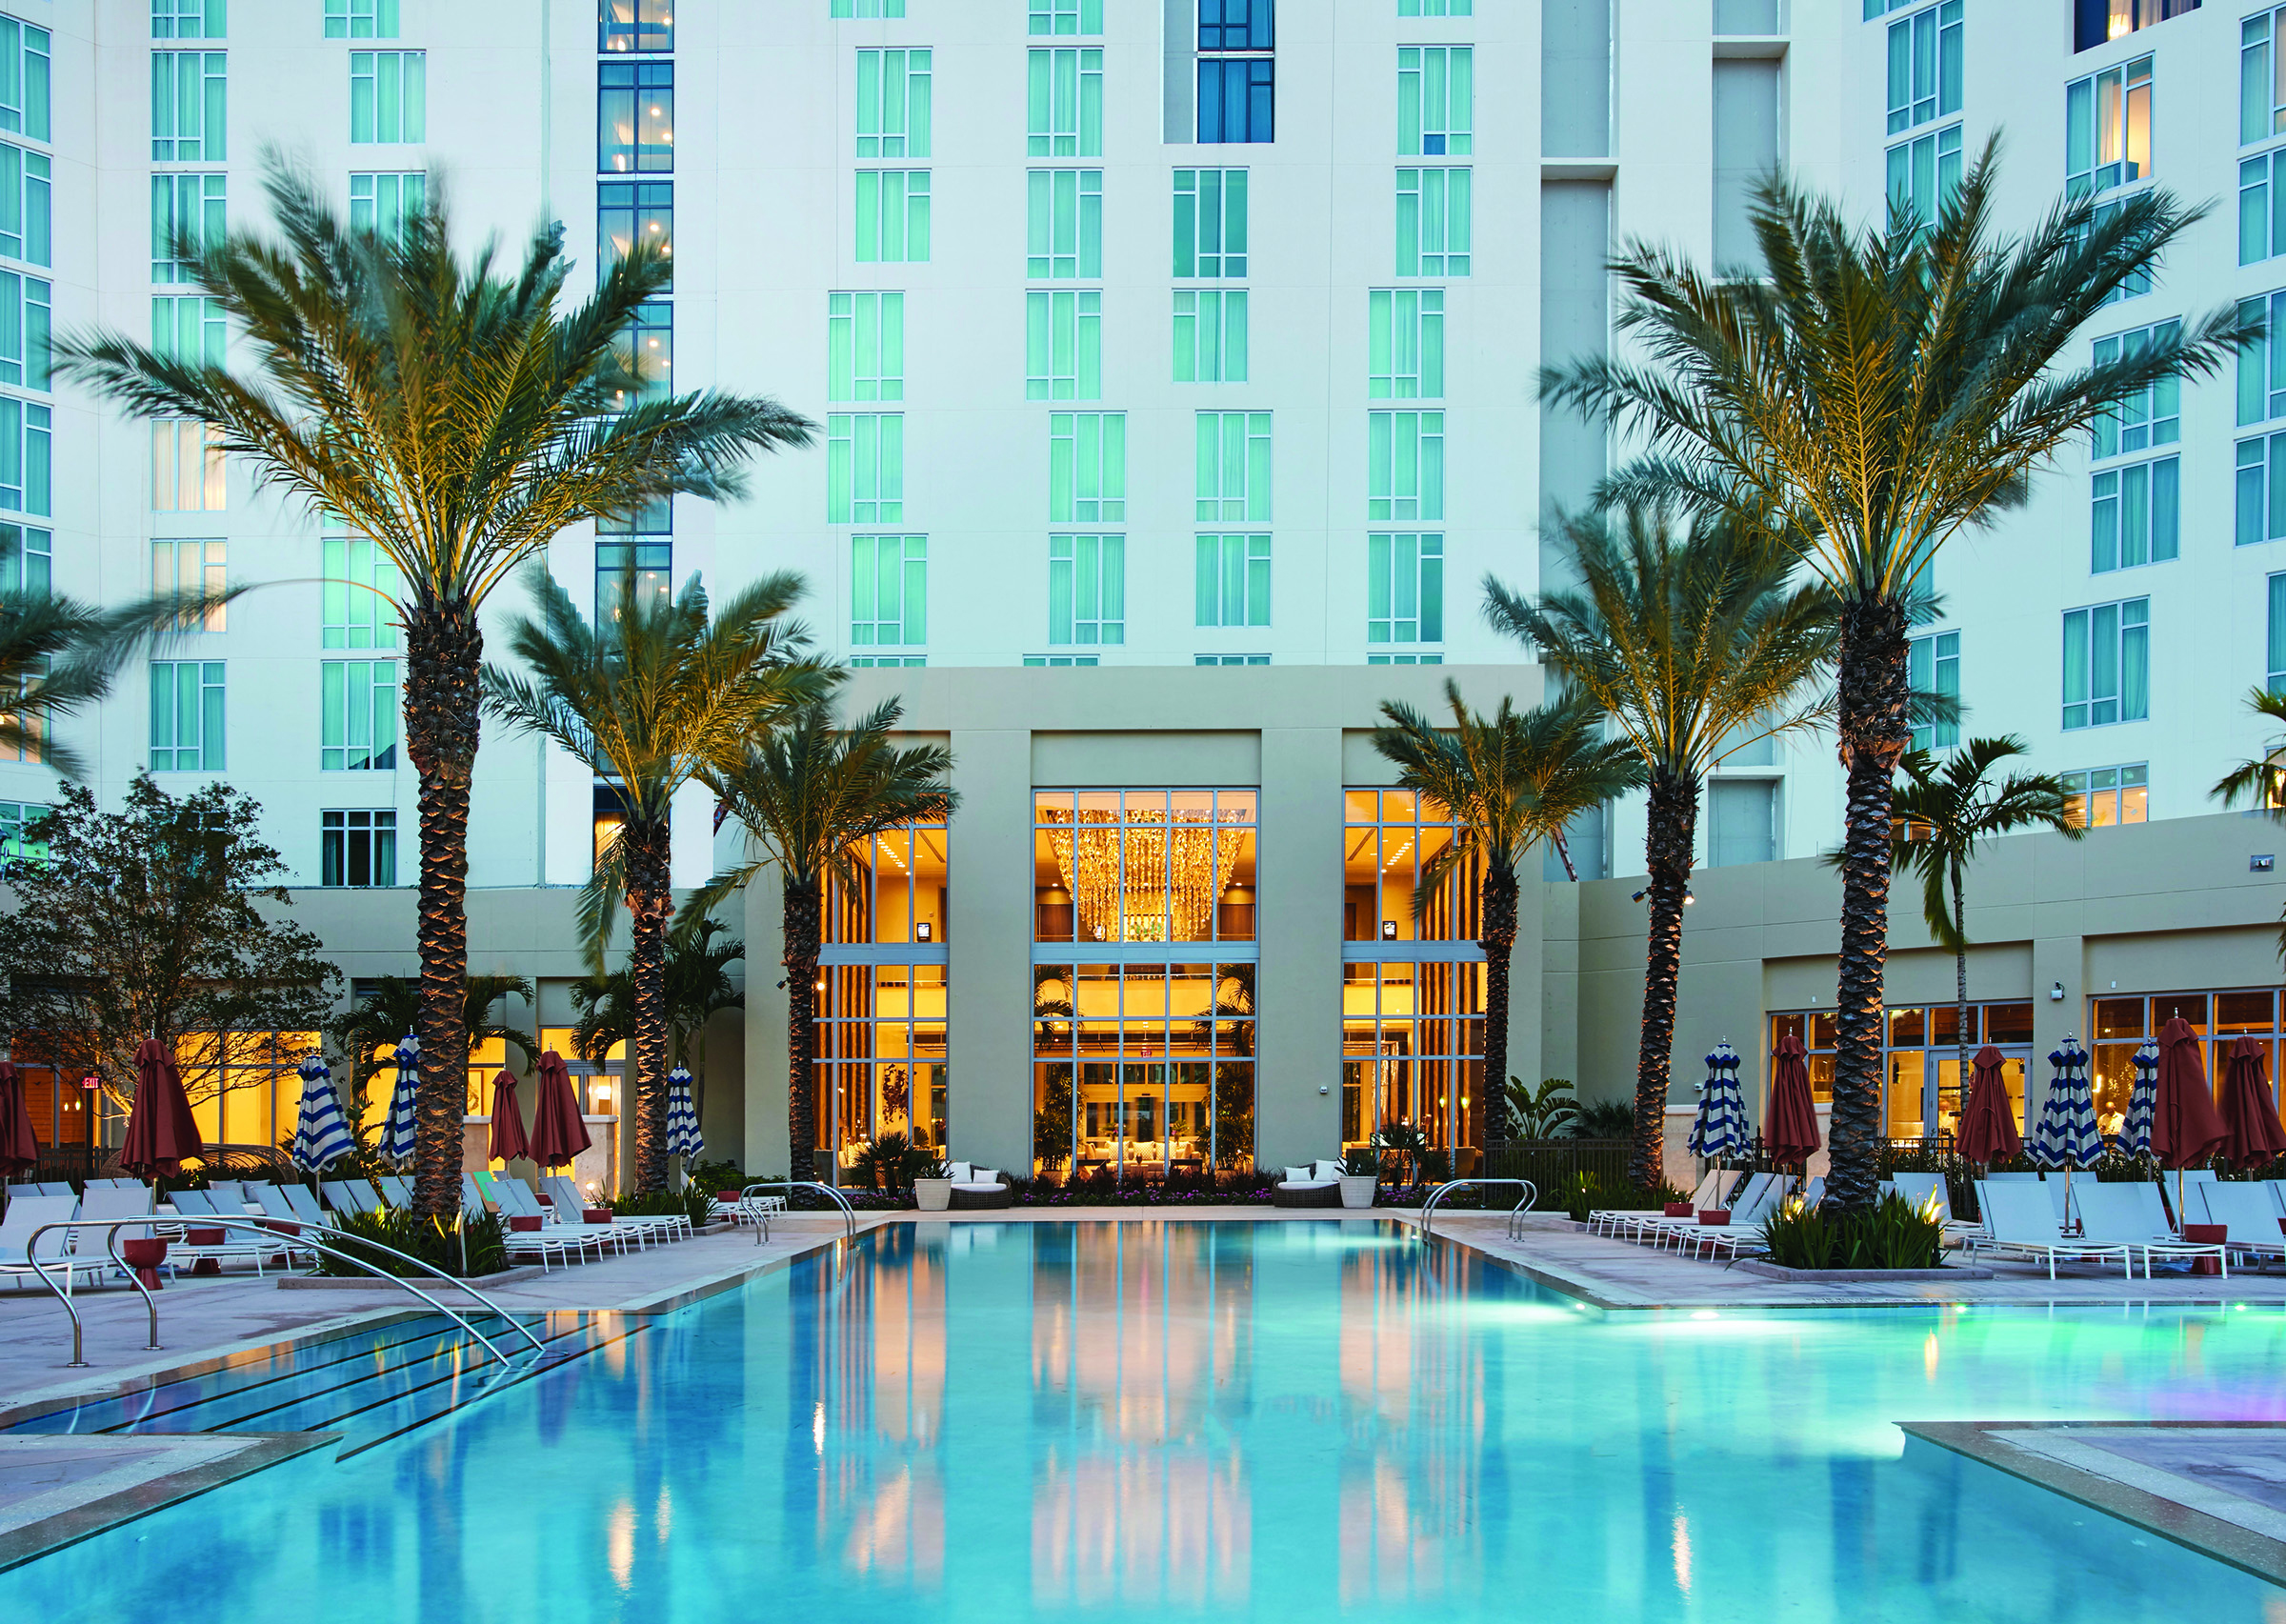 The Hilton West Palm pool surrounded by palm trees